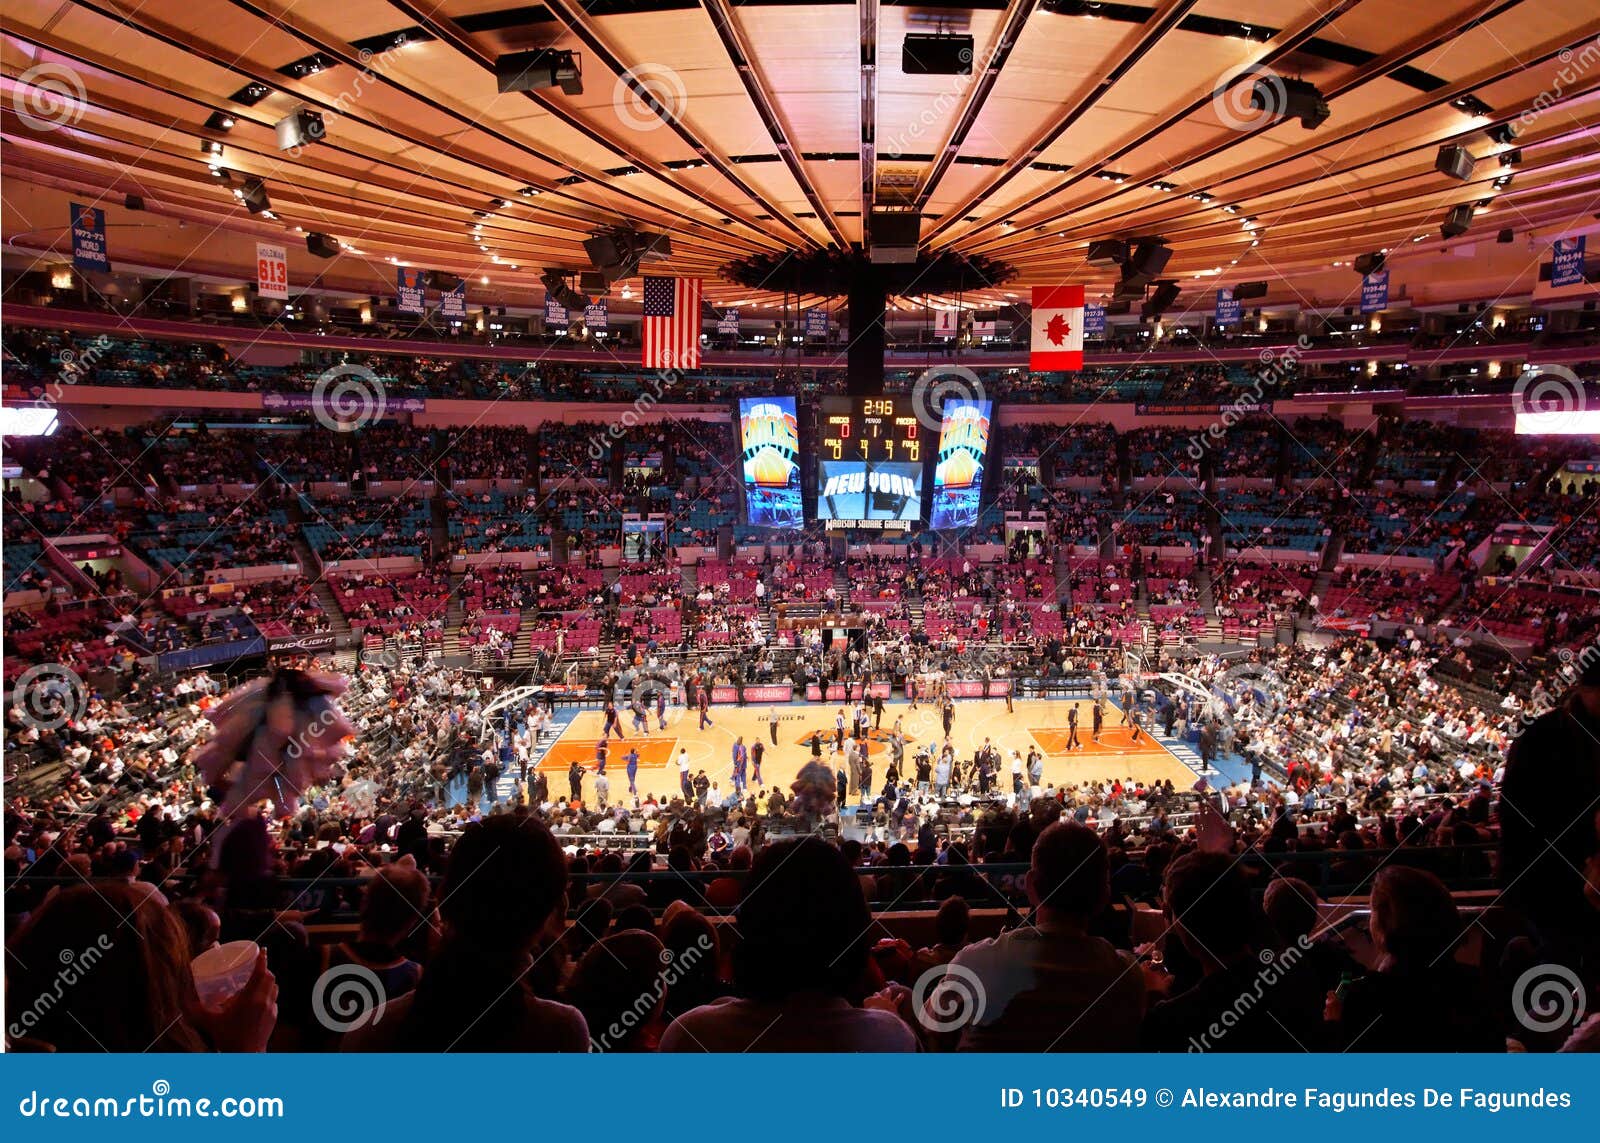 Knicks X Indiana Pacers Madison Square Garden Editorial Stock Image Image Of Heating January 10340549